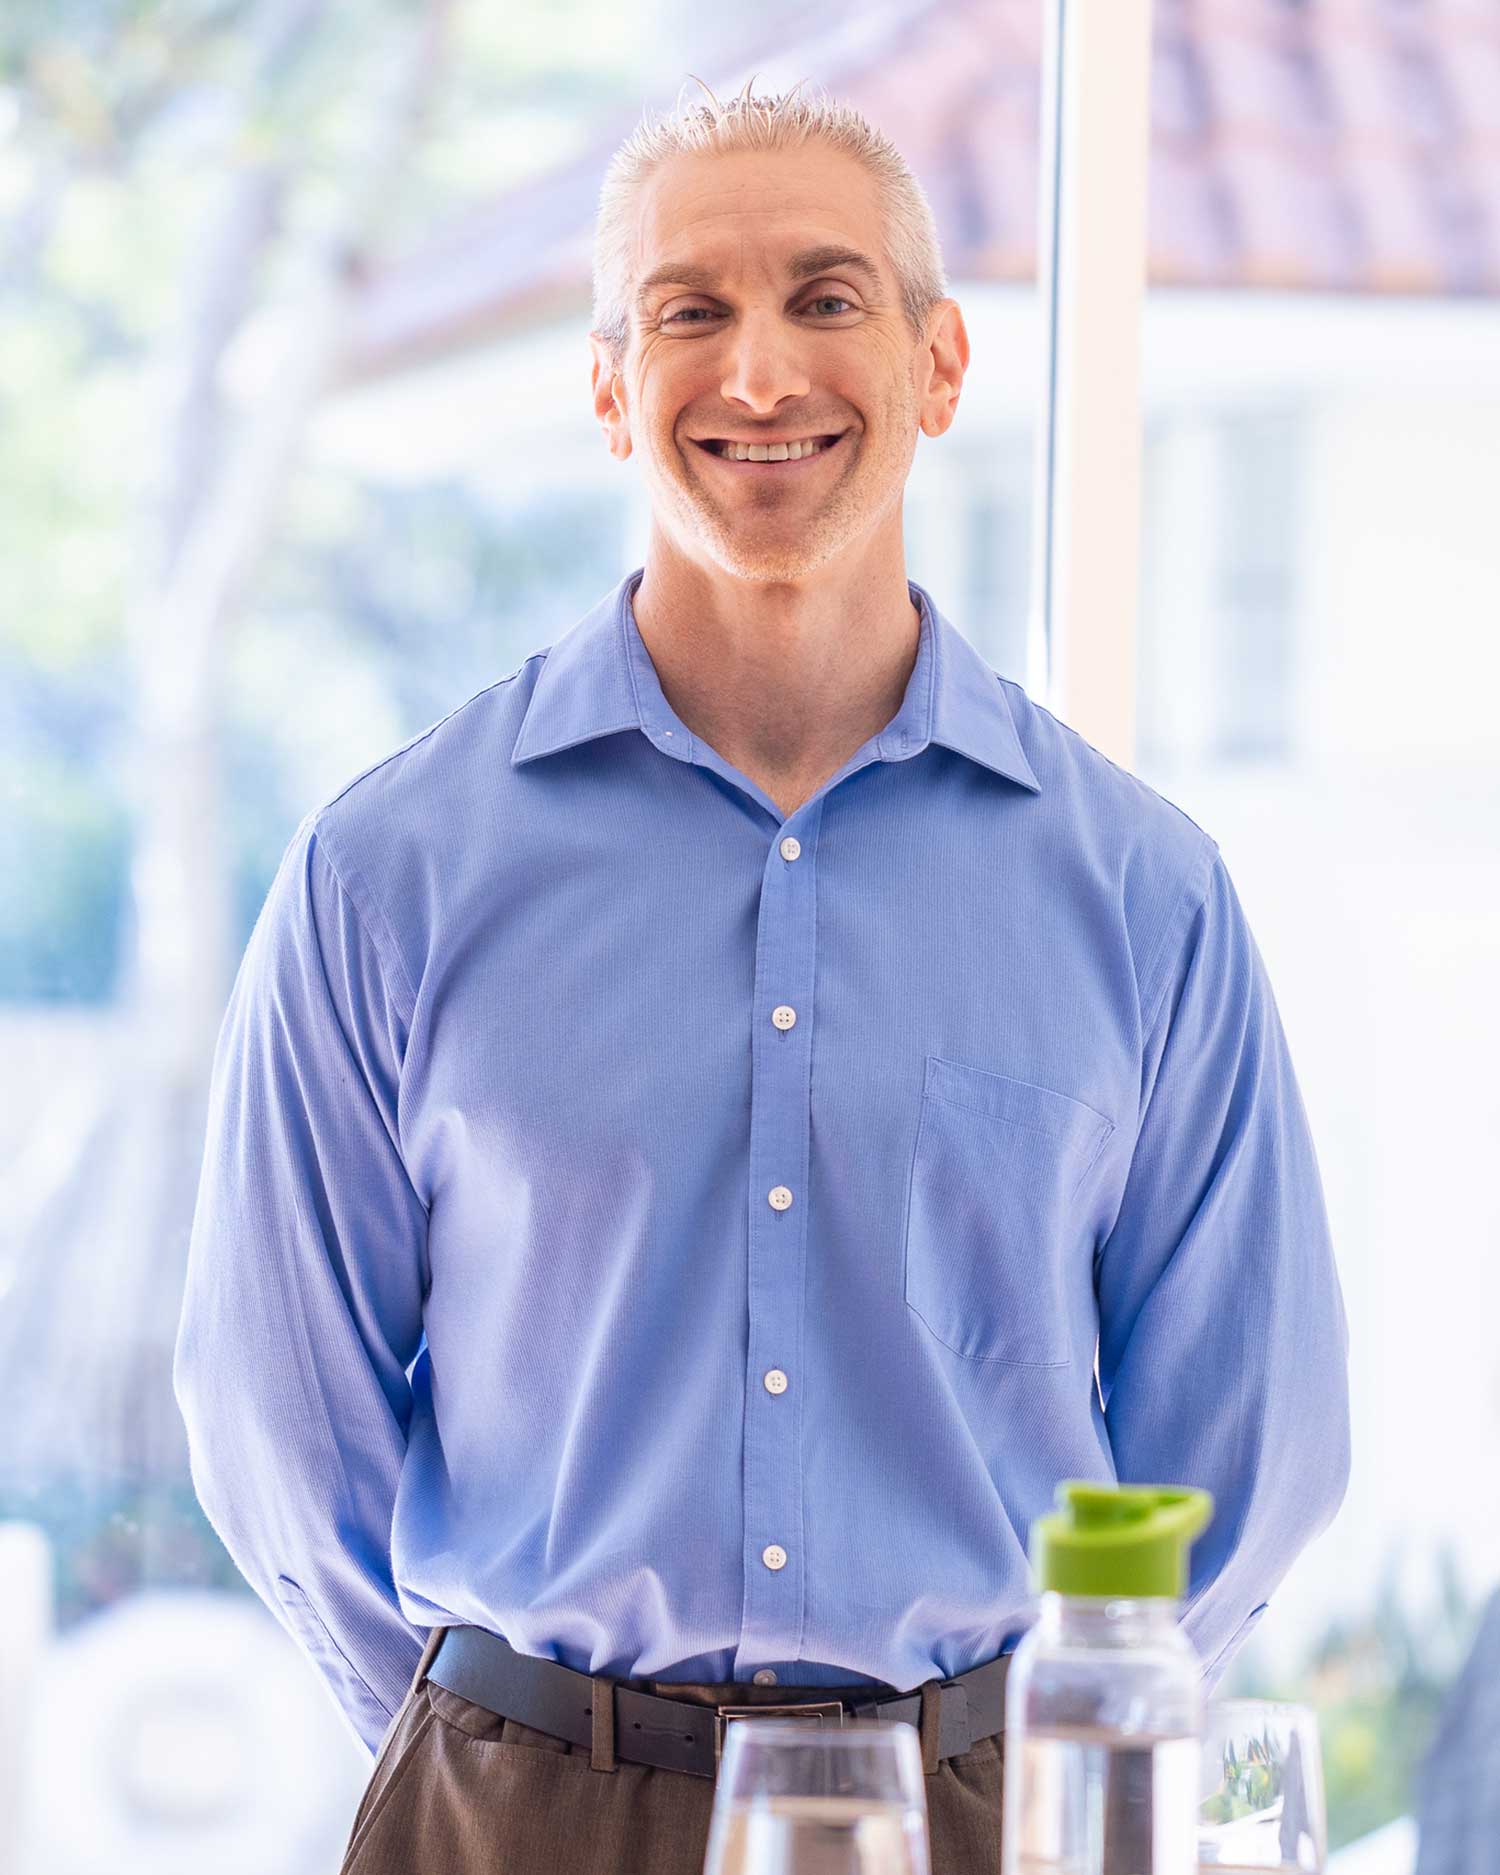 Lon Ben-Asher, MS, RD, LD/N | Nutrition Specialist & Educator at the Pritikin Wellness Retreat